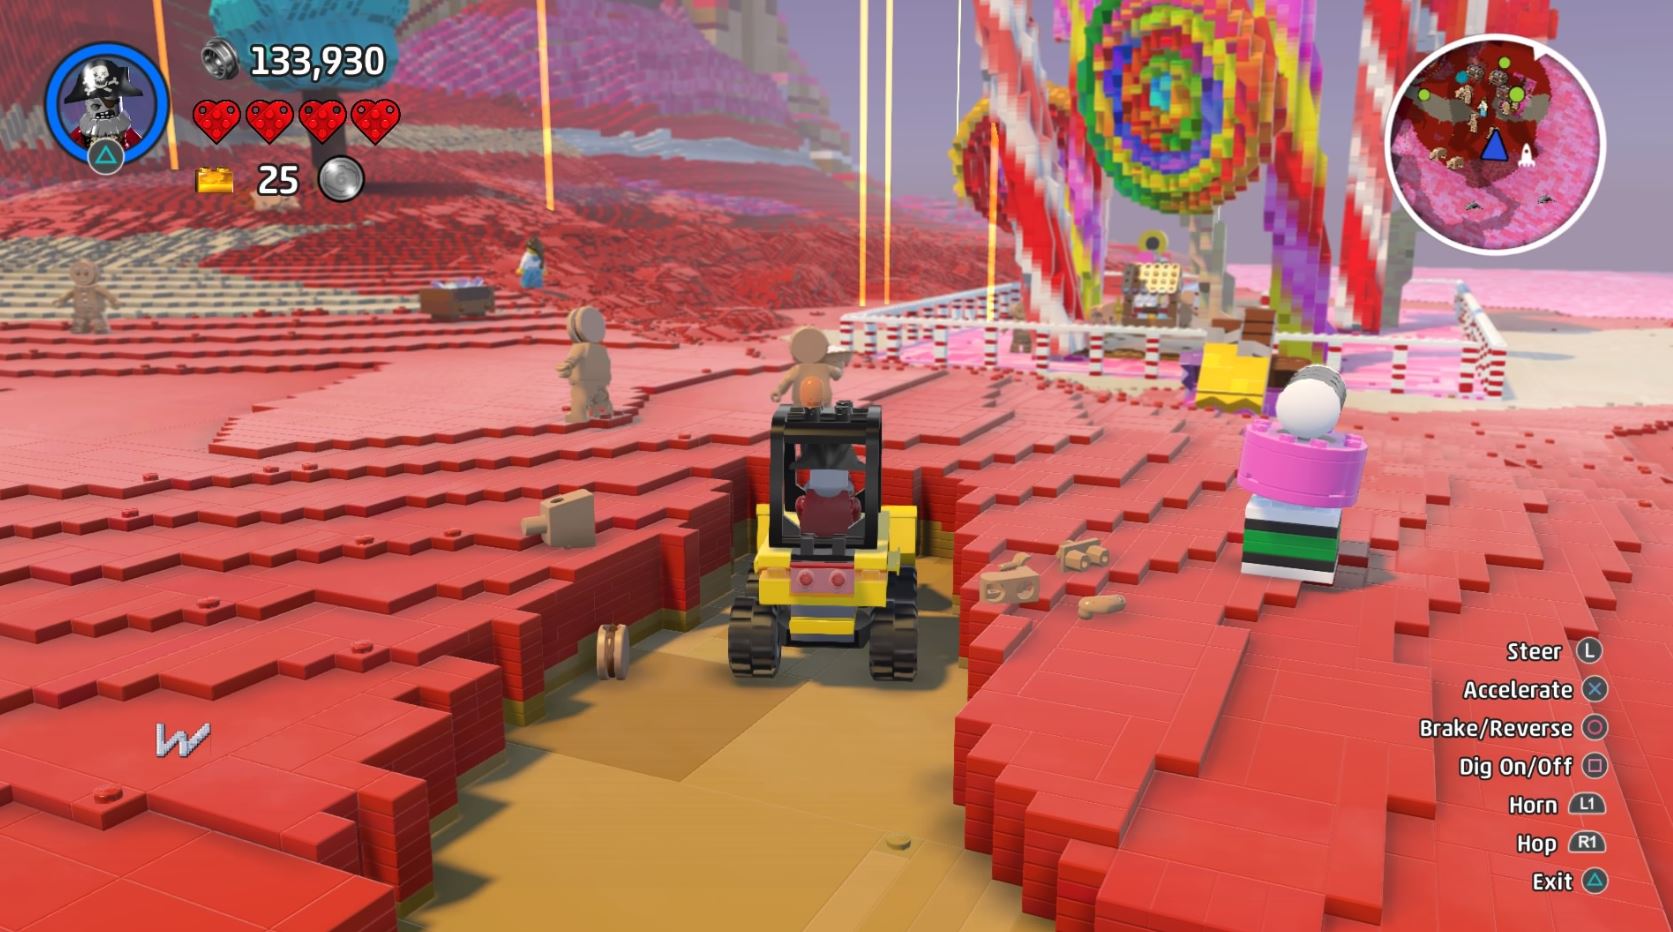 Lego_Worlds_PS4_sold_by_Technomobi